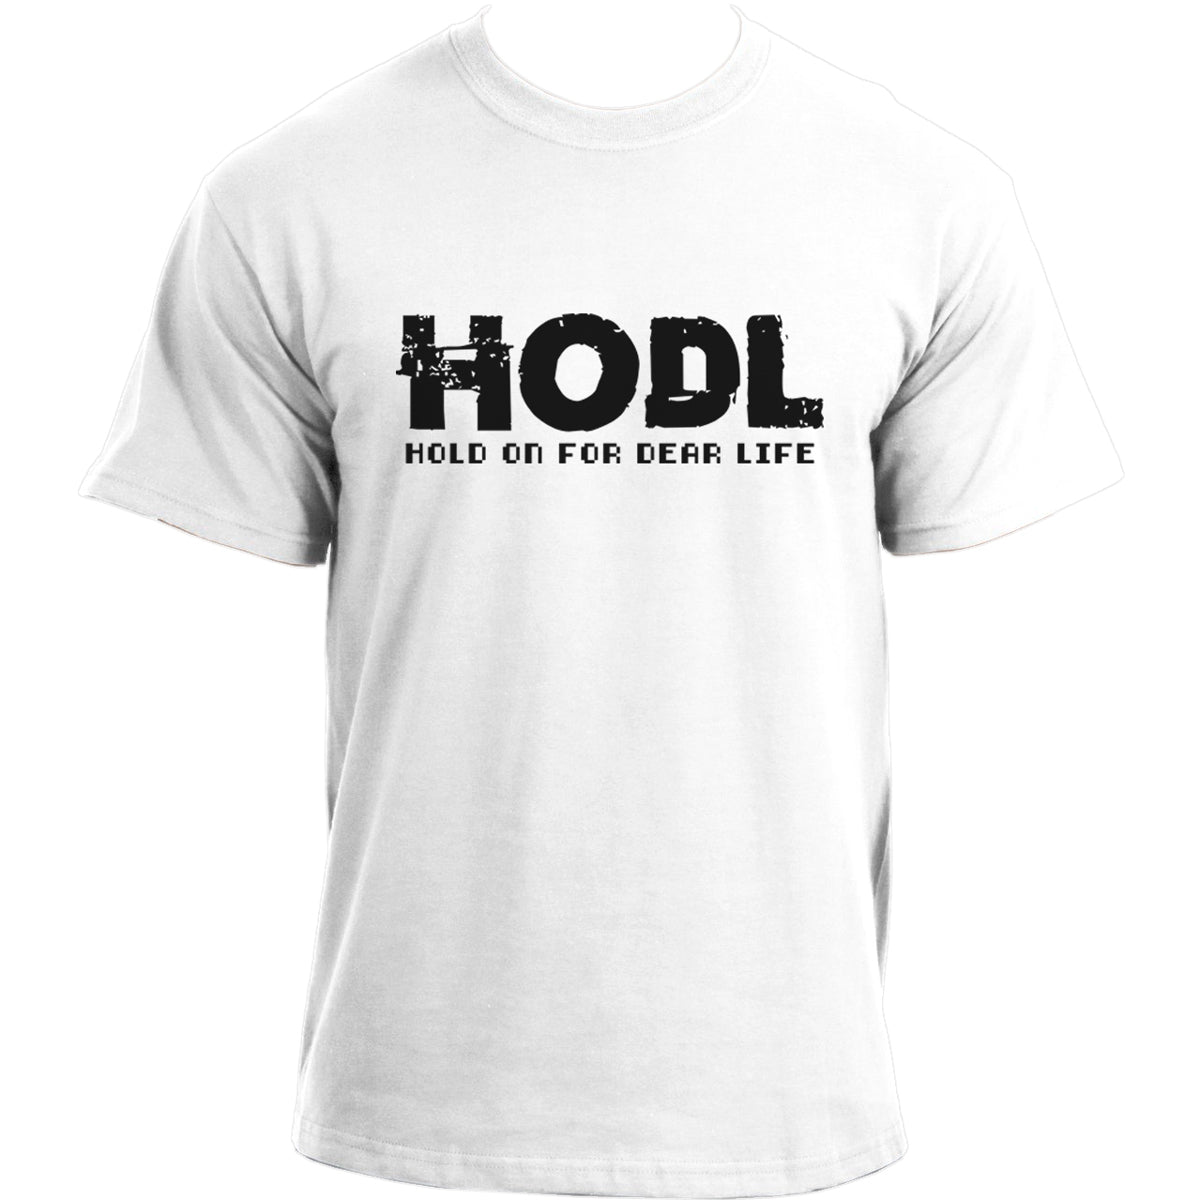 Hold on for Dear Life Crypto T-Shirt I HODL T Shirt I Cryptocurrency Trader Blockchain Investor Tshirt